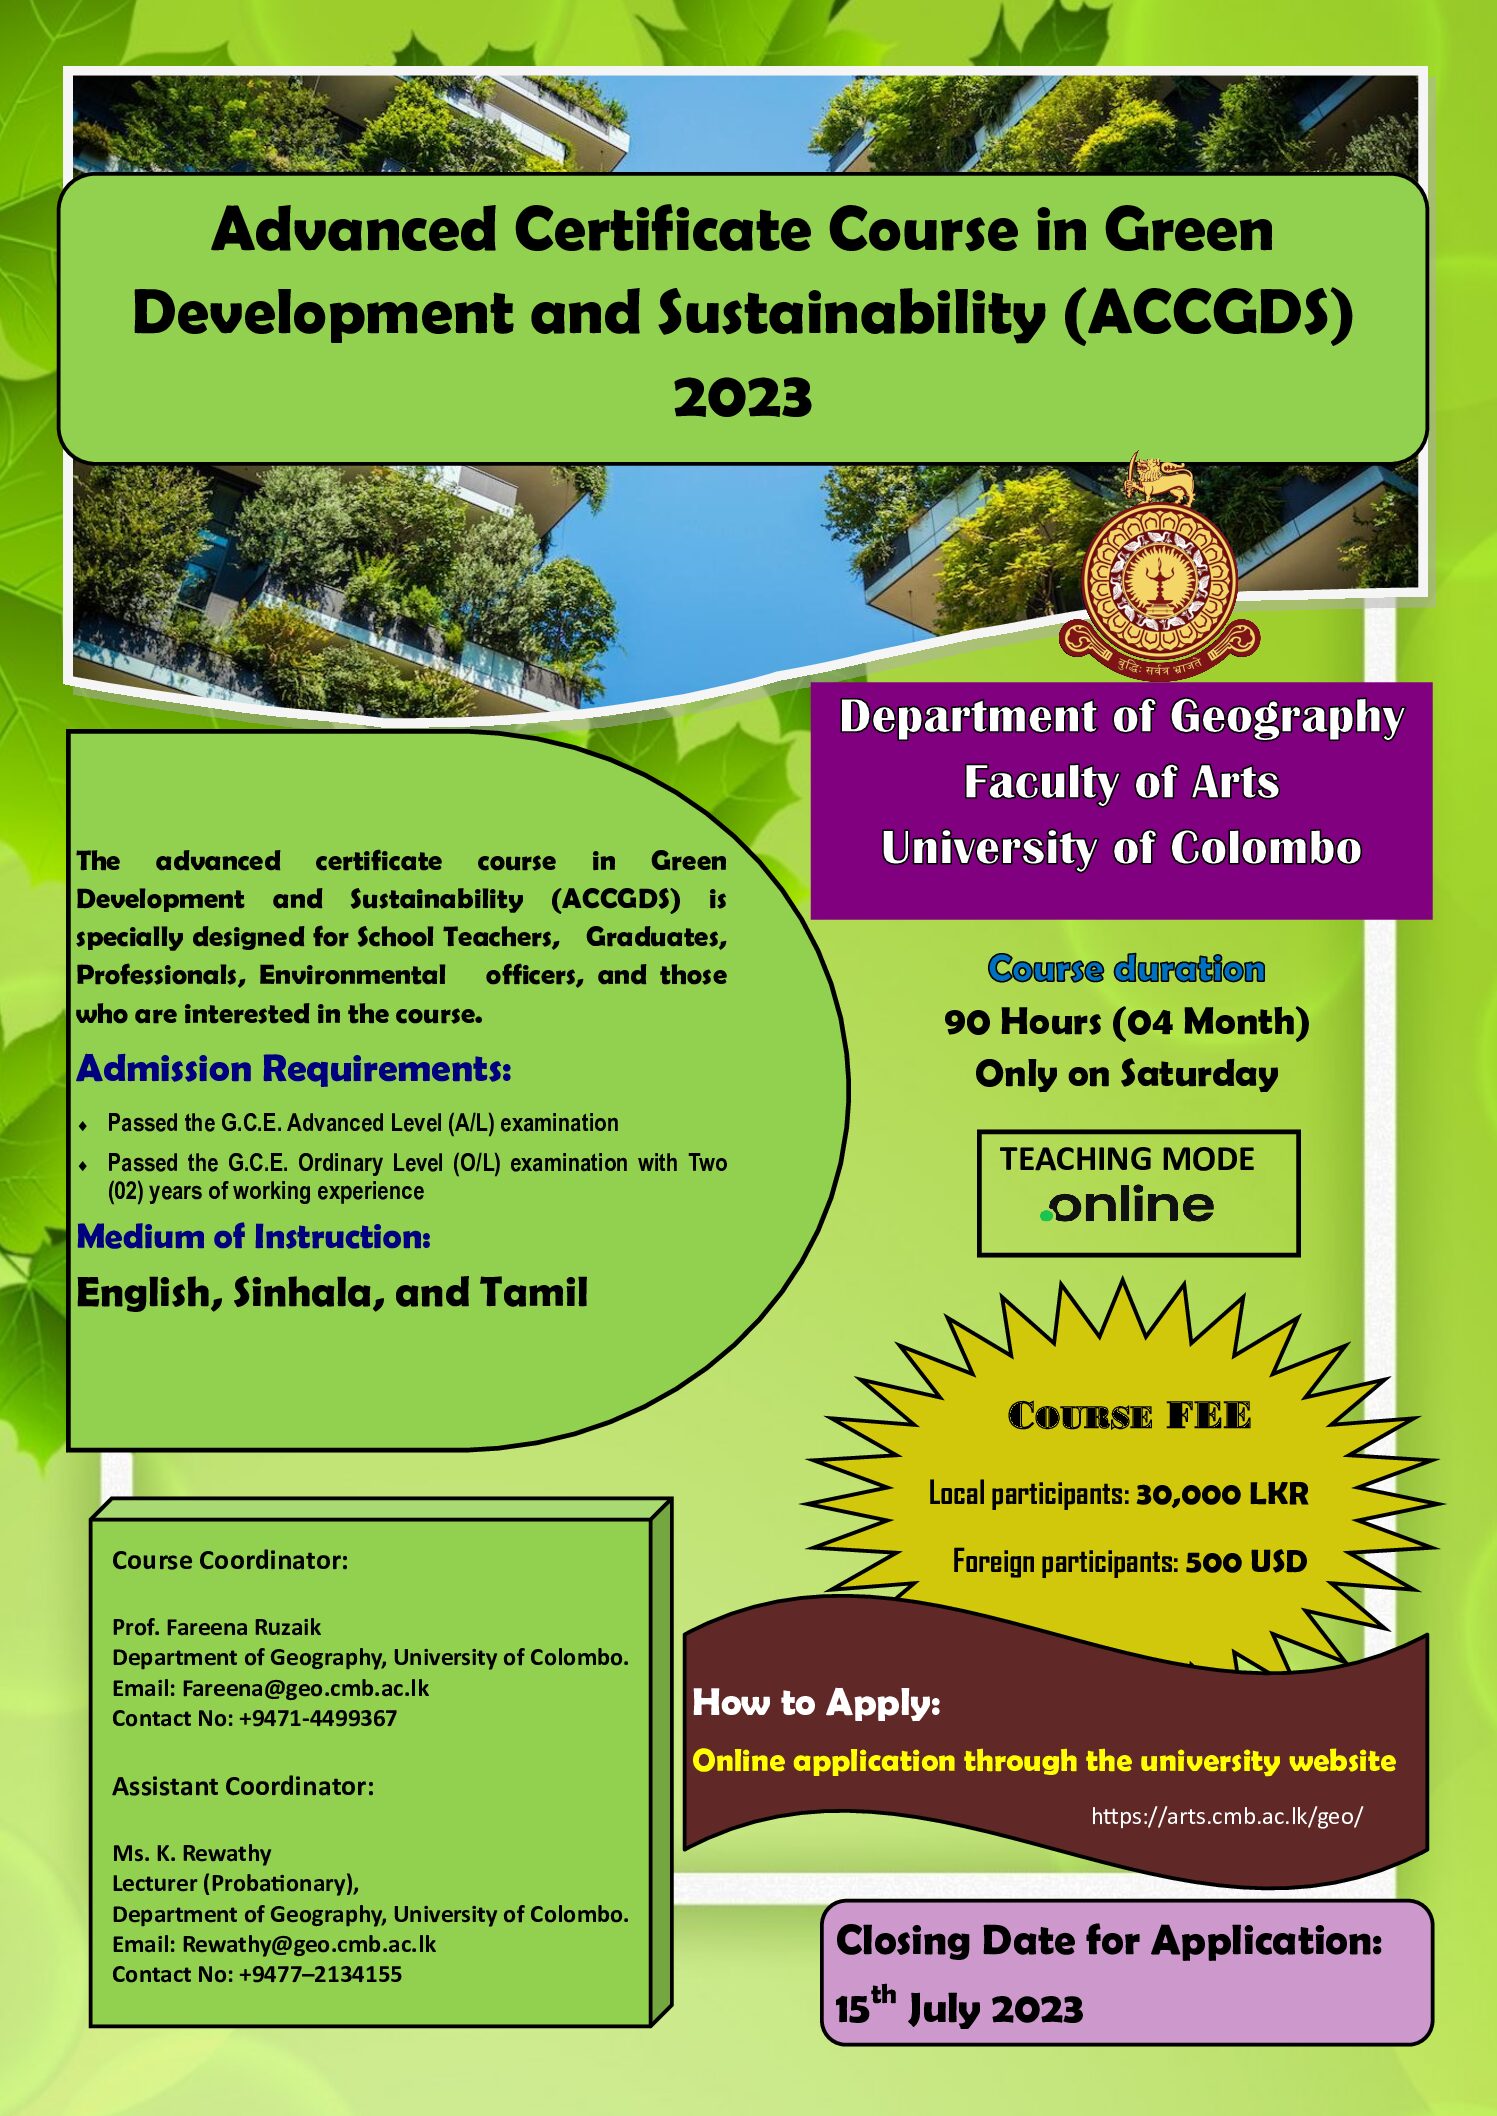 Advanced Certificate Course in Green Development and Sustainability (ACCGDS) – 2023